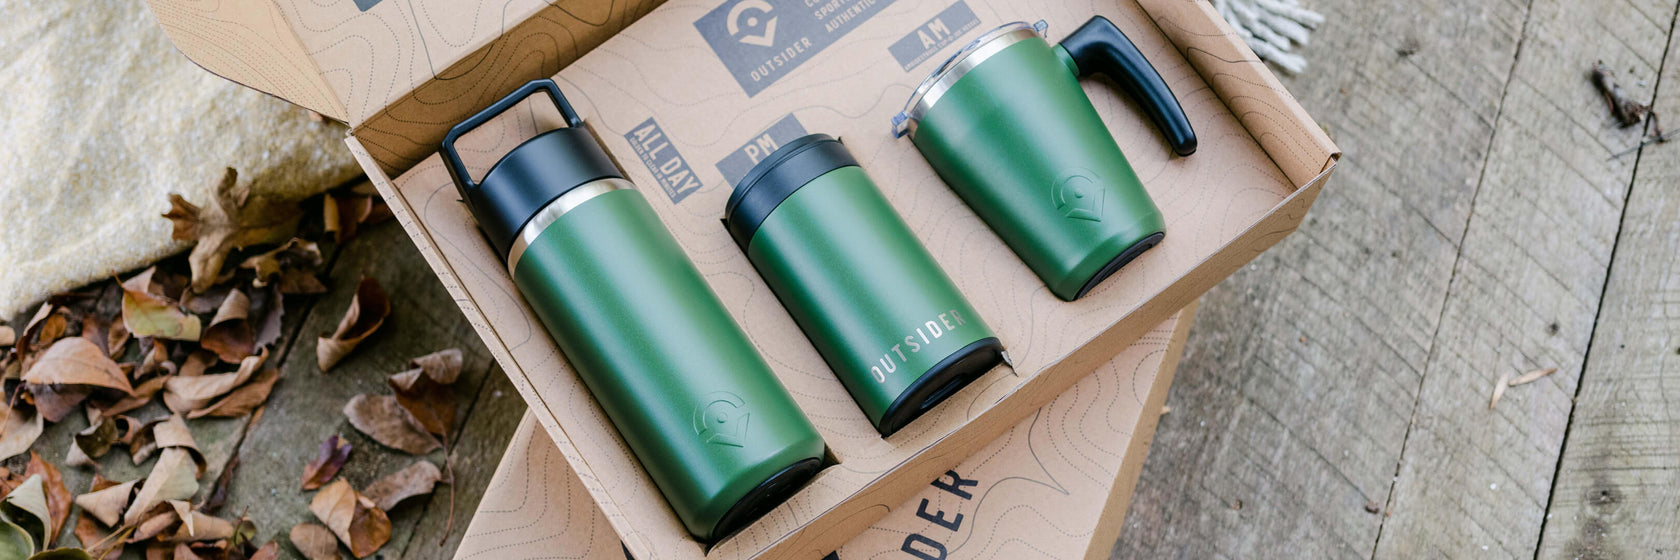 Outsider Stainless Steel Insulated Coffee Mug Water Tumbler Seltzer Koozie Bundle in Green